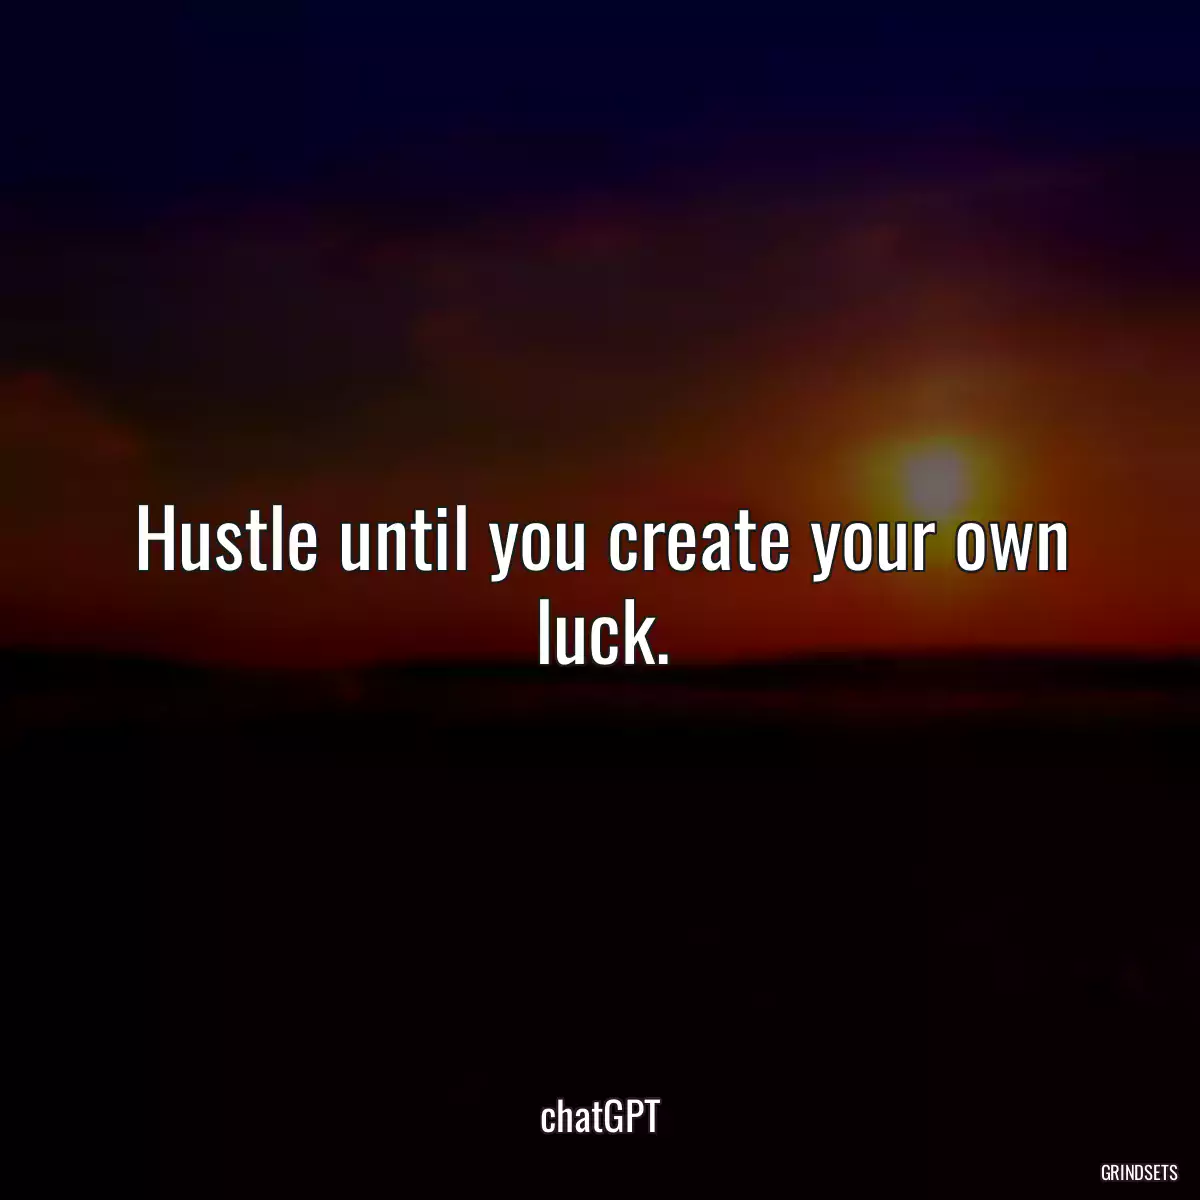 Hustle until you create your own luck.